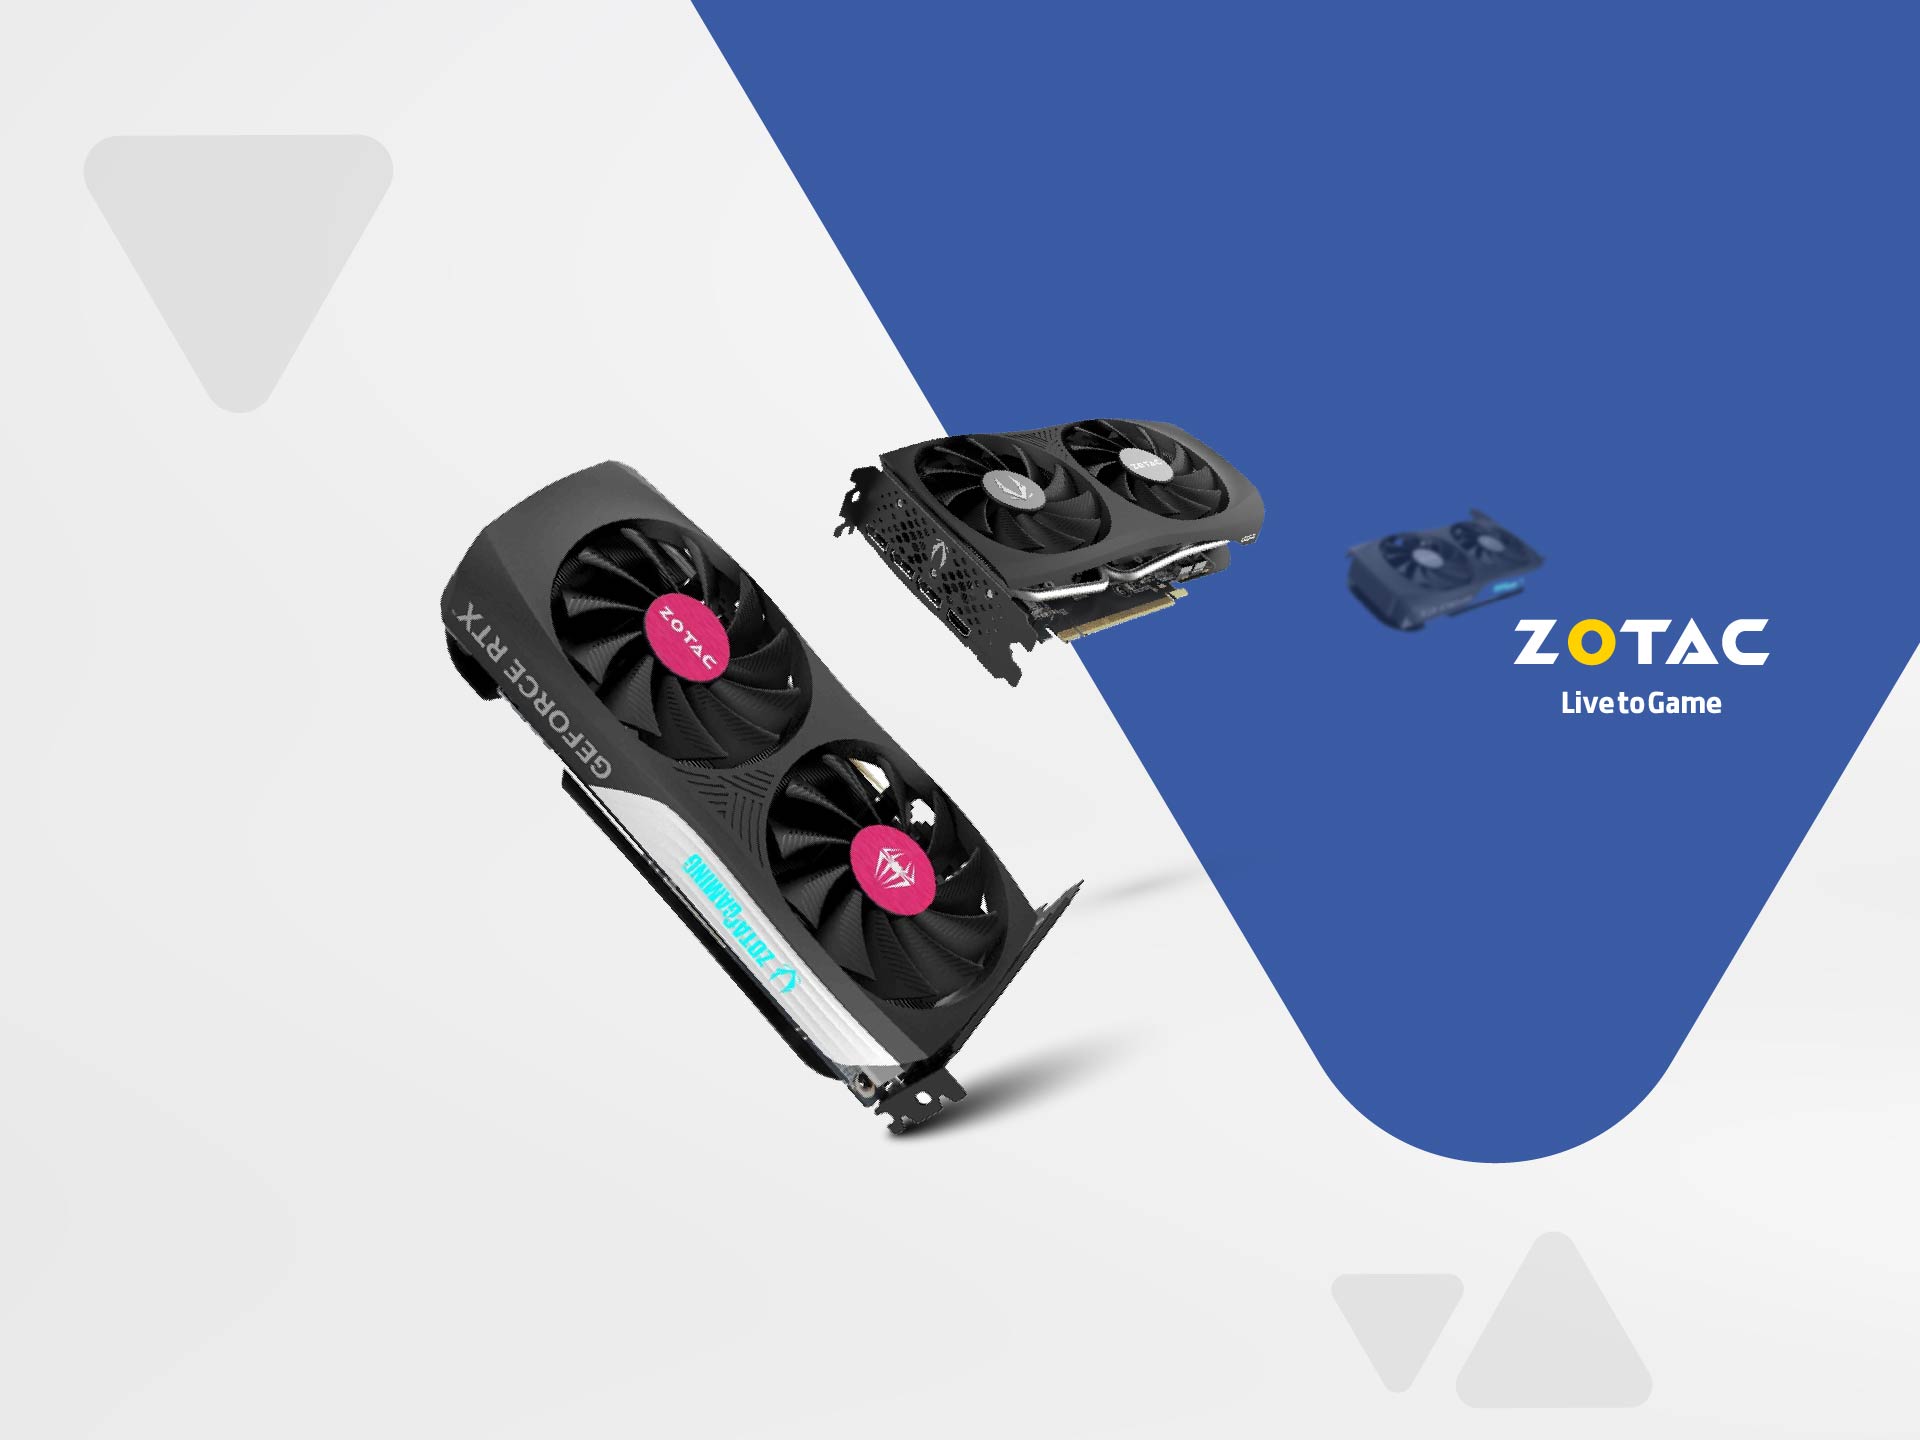 Zotac Products